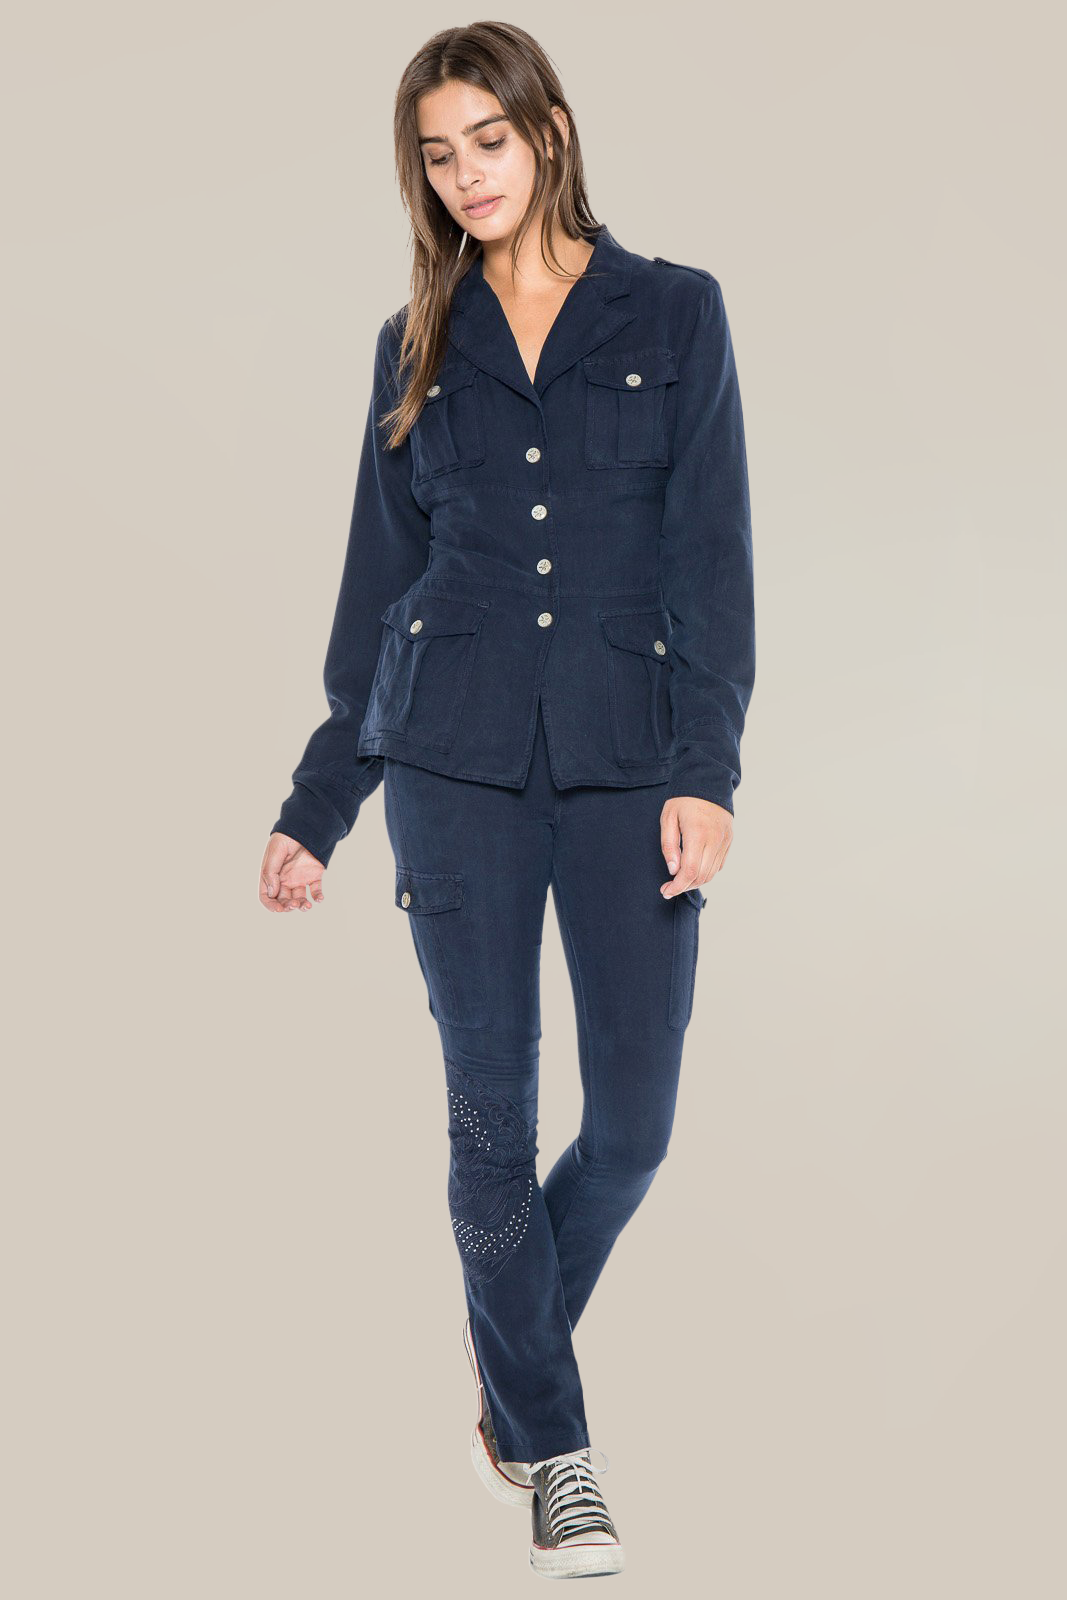 100% Silk long sleeve jacket with lining in Navy